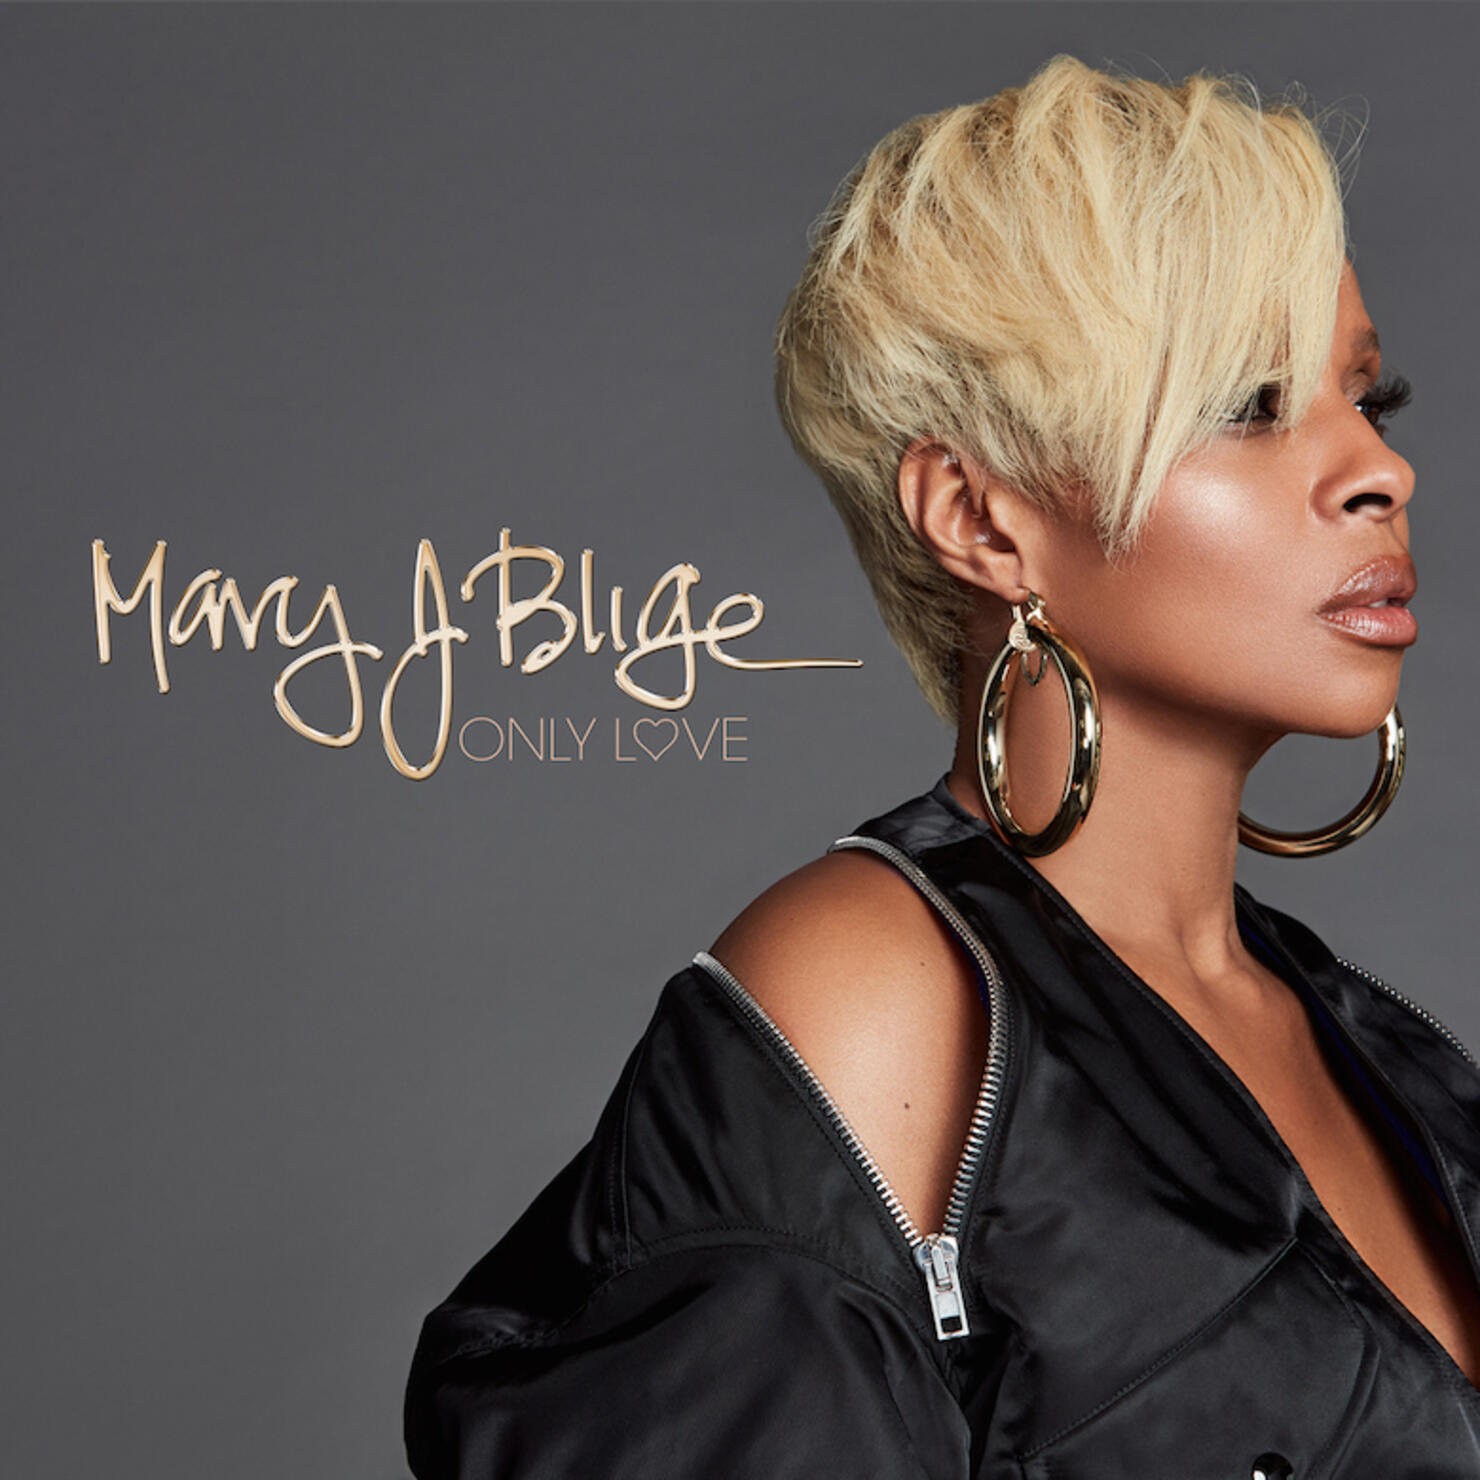 Mary J. Blige's Power Look Available Now! - Simone I. Smith